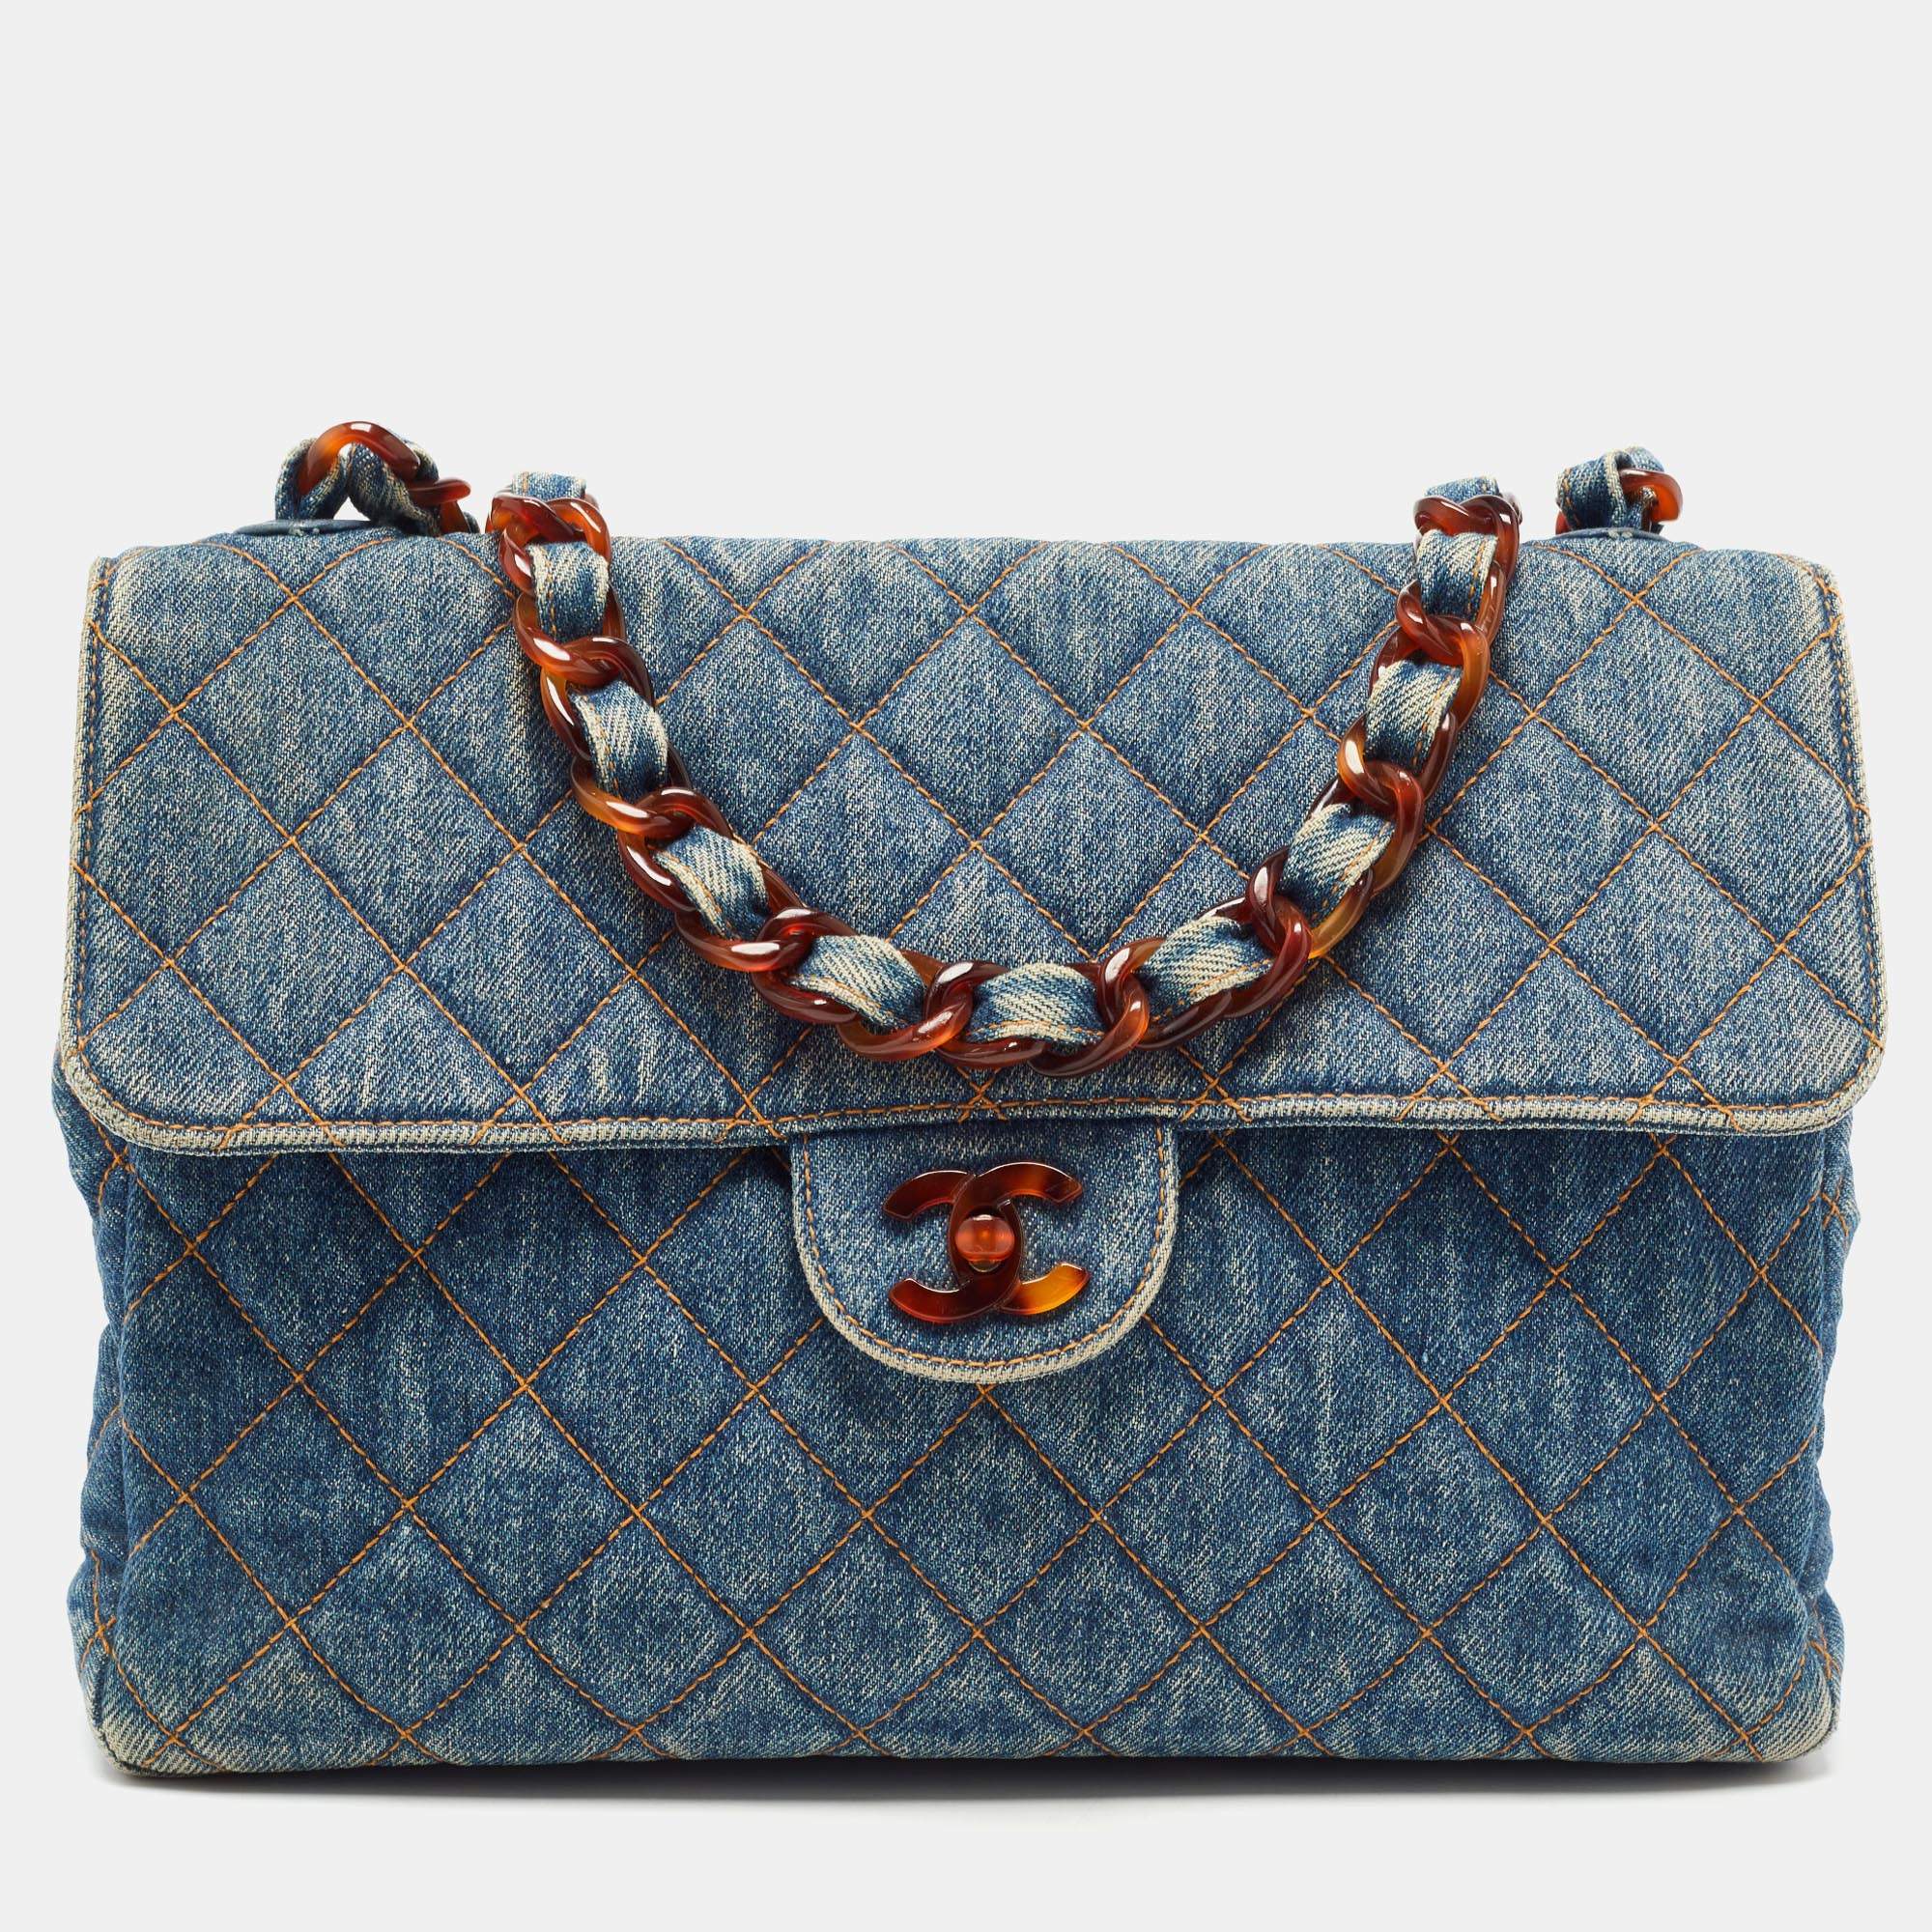 Chanel Navy Blue Quilted Denim Jumbo Flap Bag